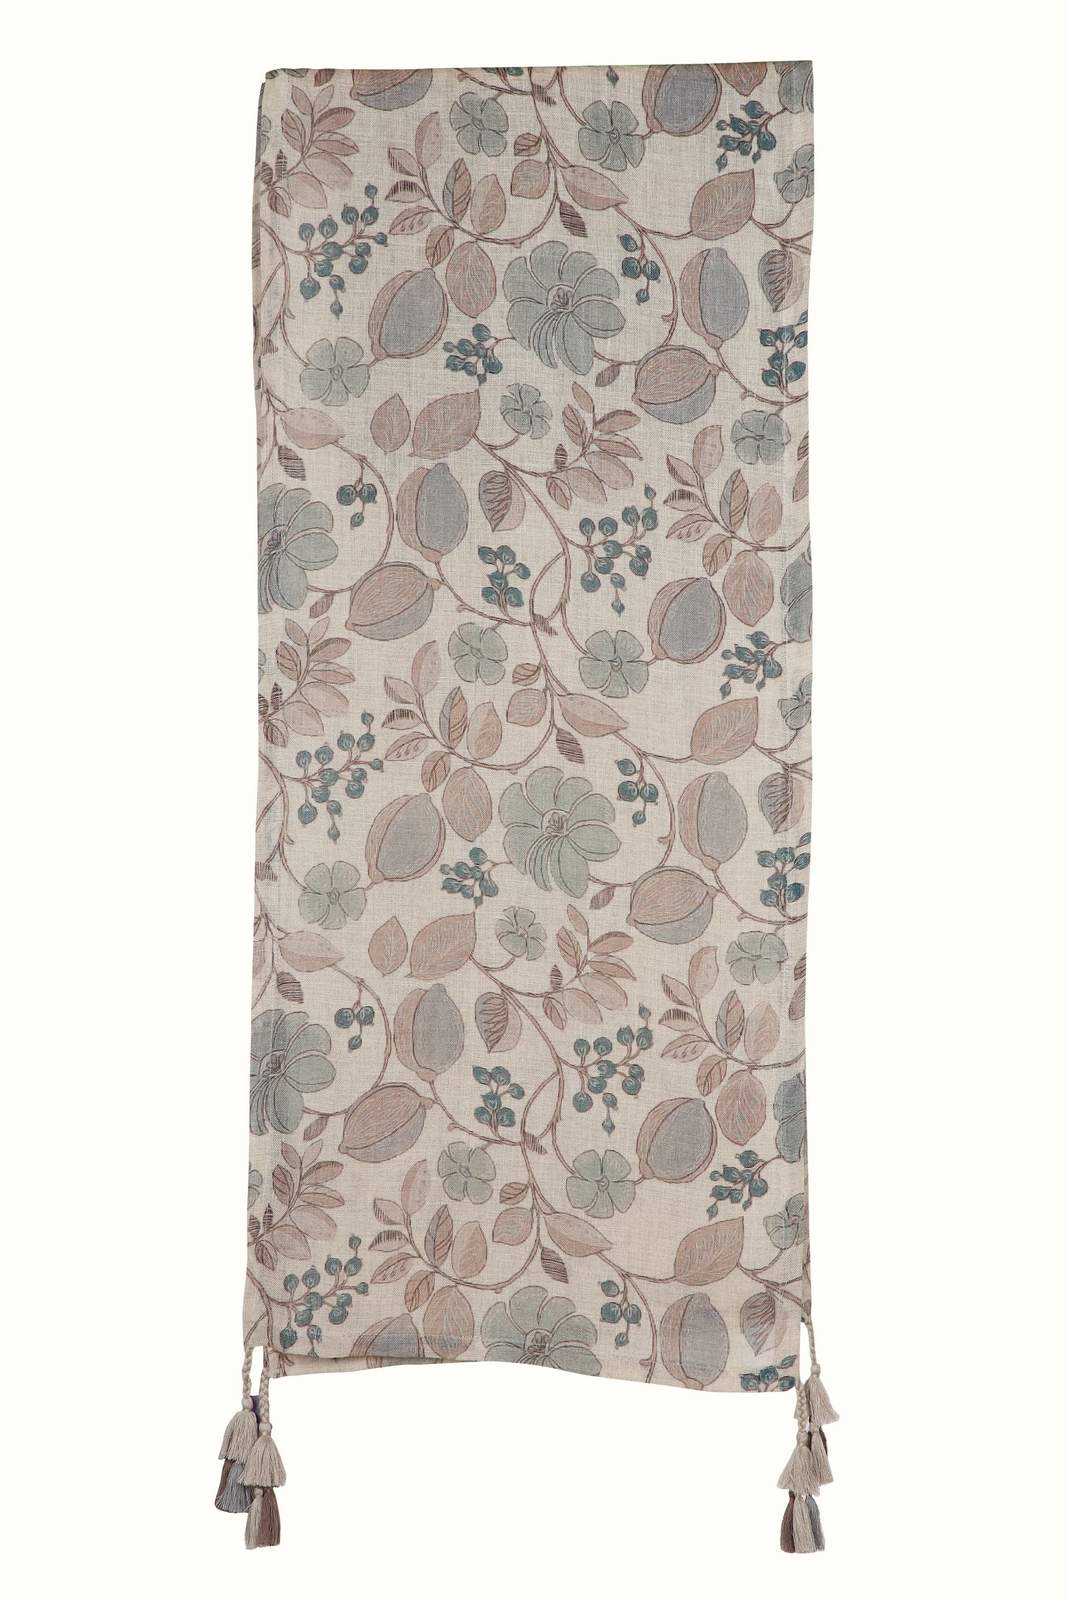 Load image into Gallery viewer, Linen and Linens - Teal and Brown Printed Linen Stole - 3
